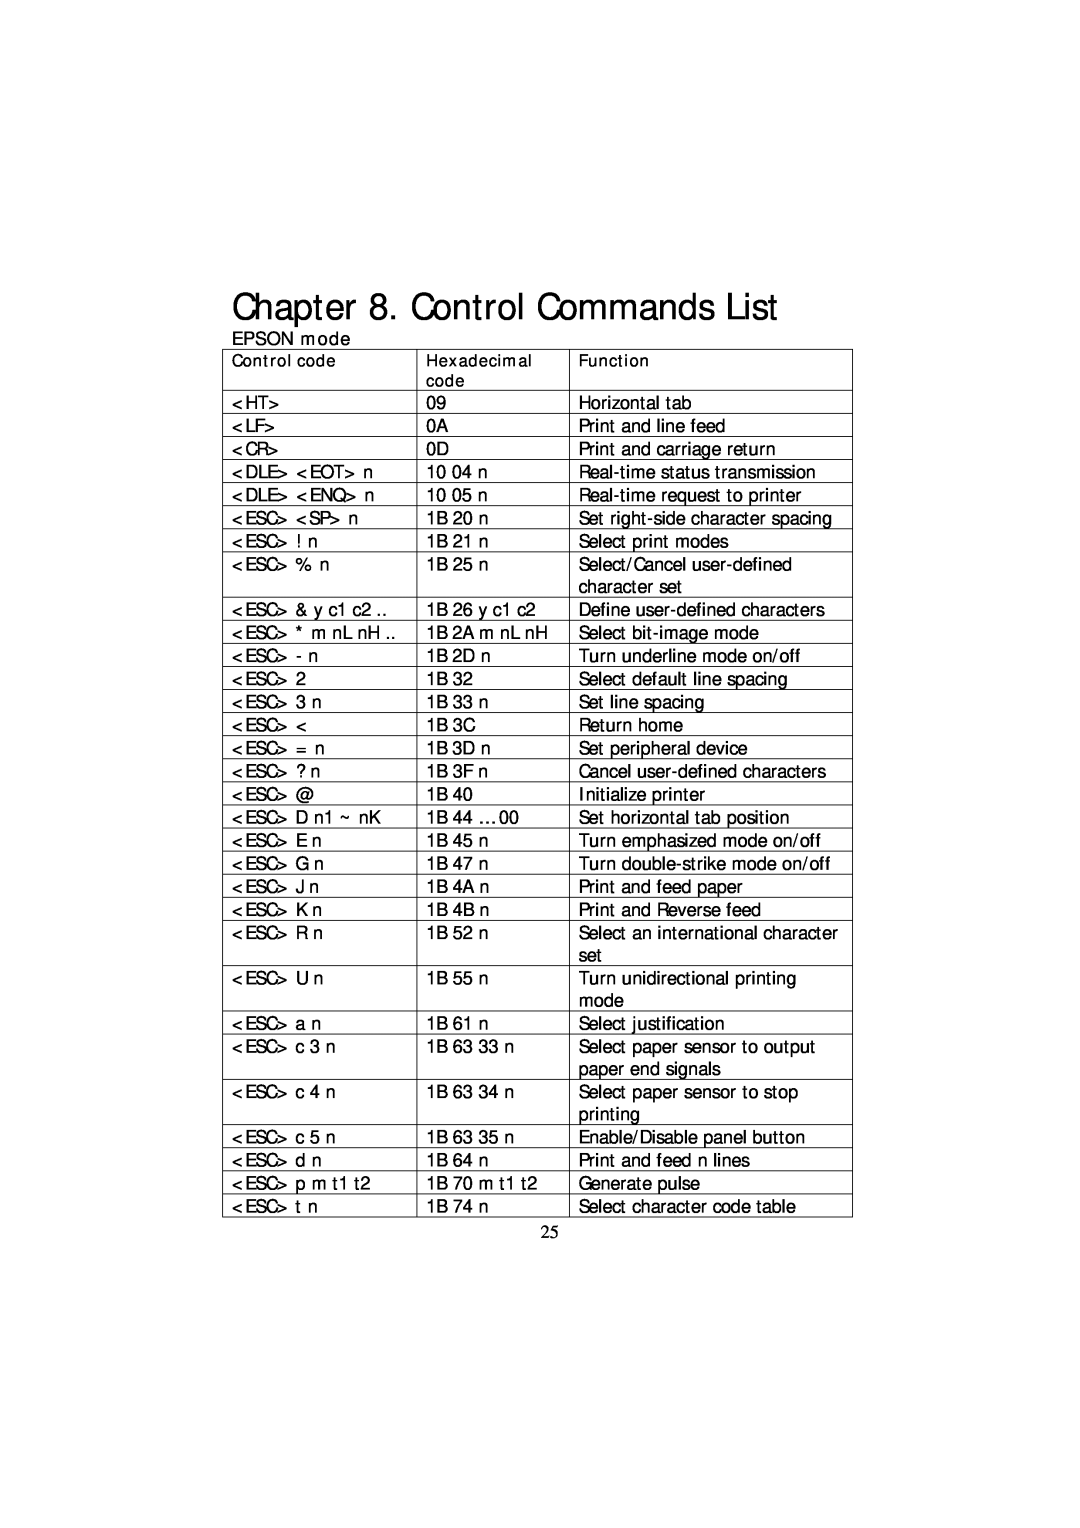 Samsung SRP-270S, SRP-270P, SRP-270U specifications Control Commands List, EPSON mode 